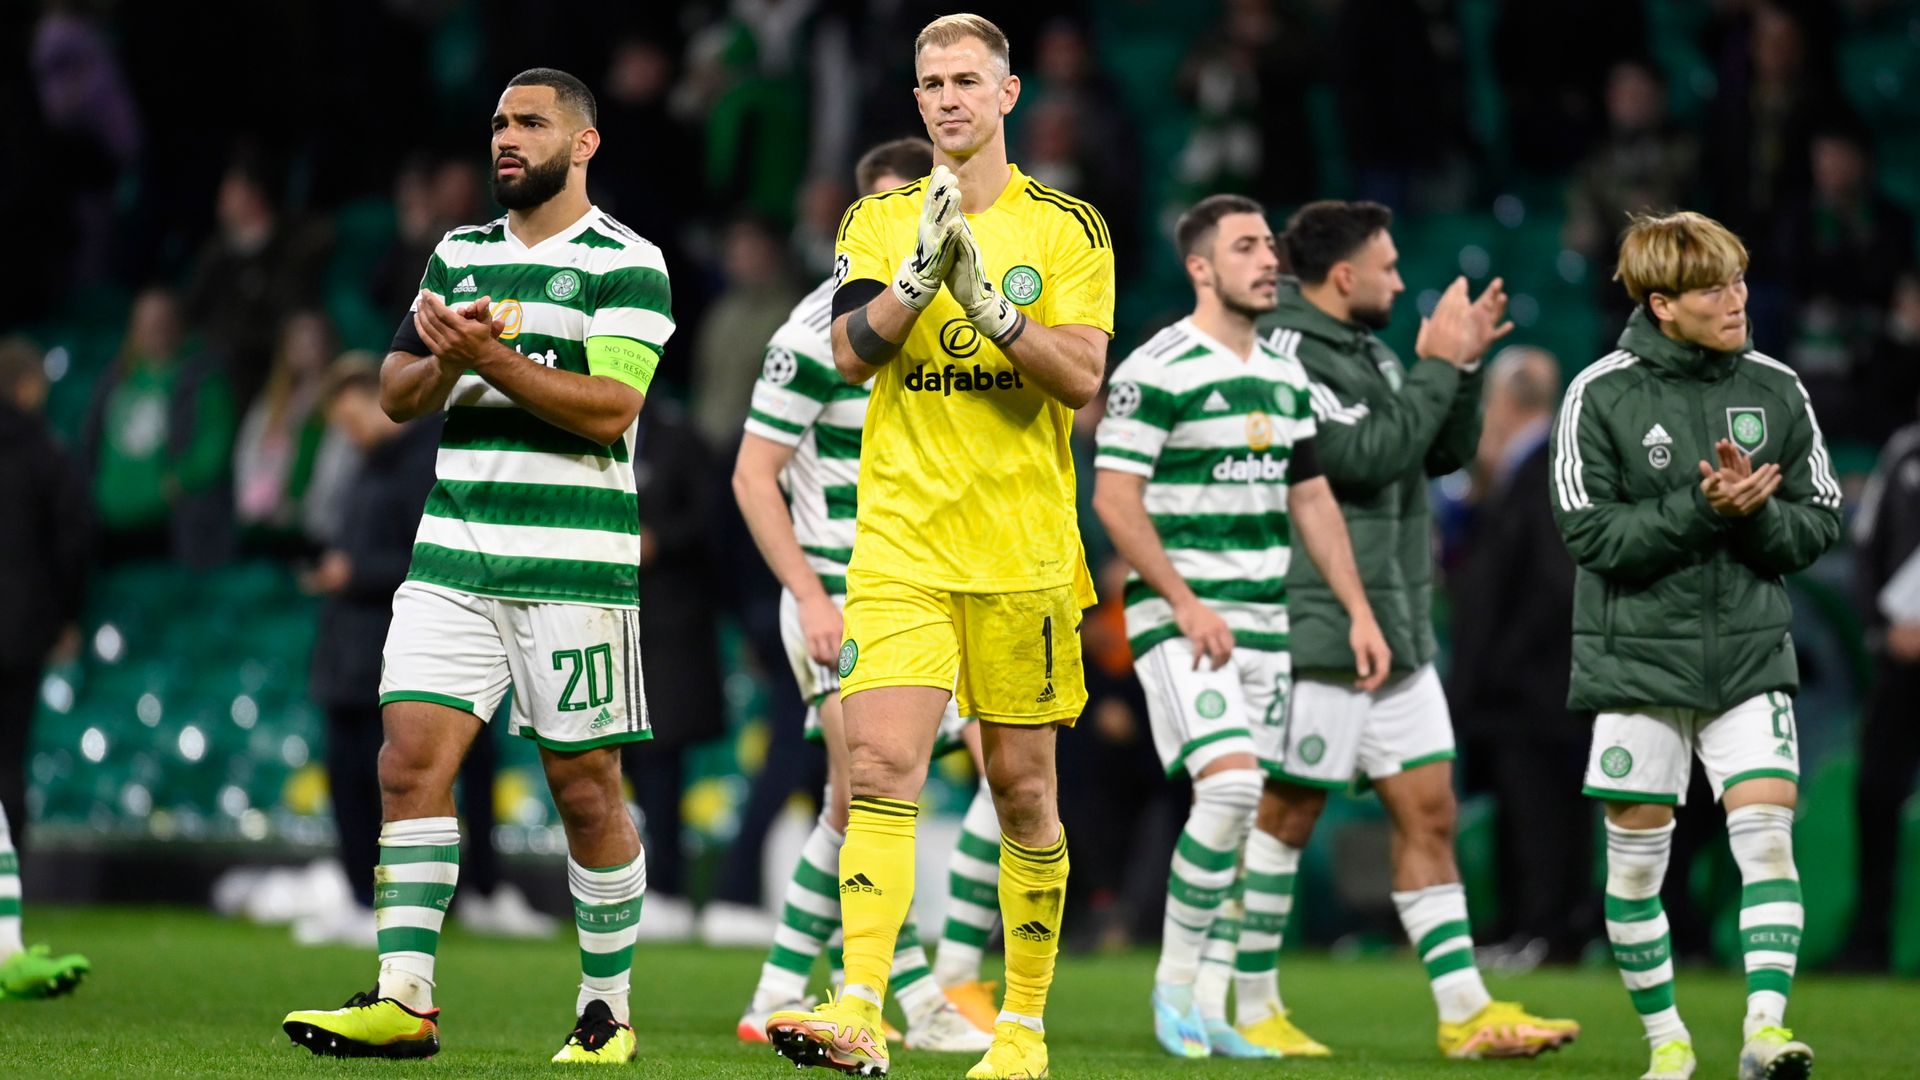 Postecoglou: Celtic don't look out of place in Champions League